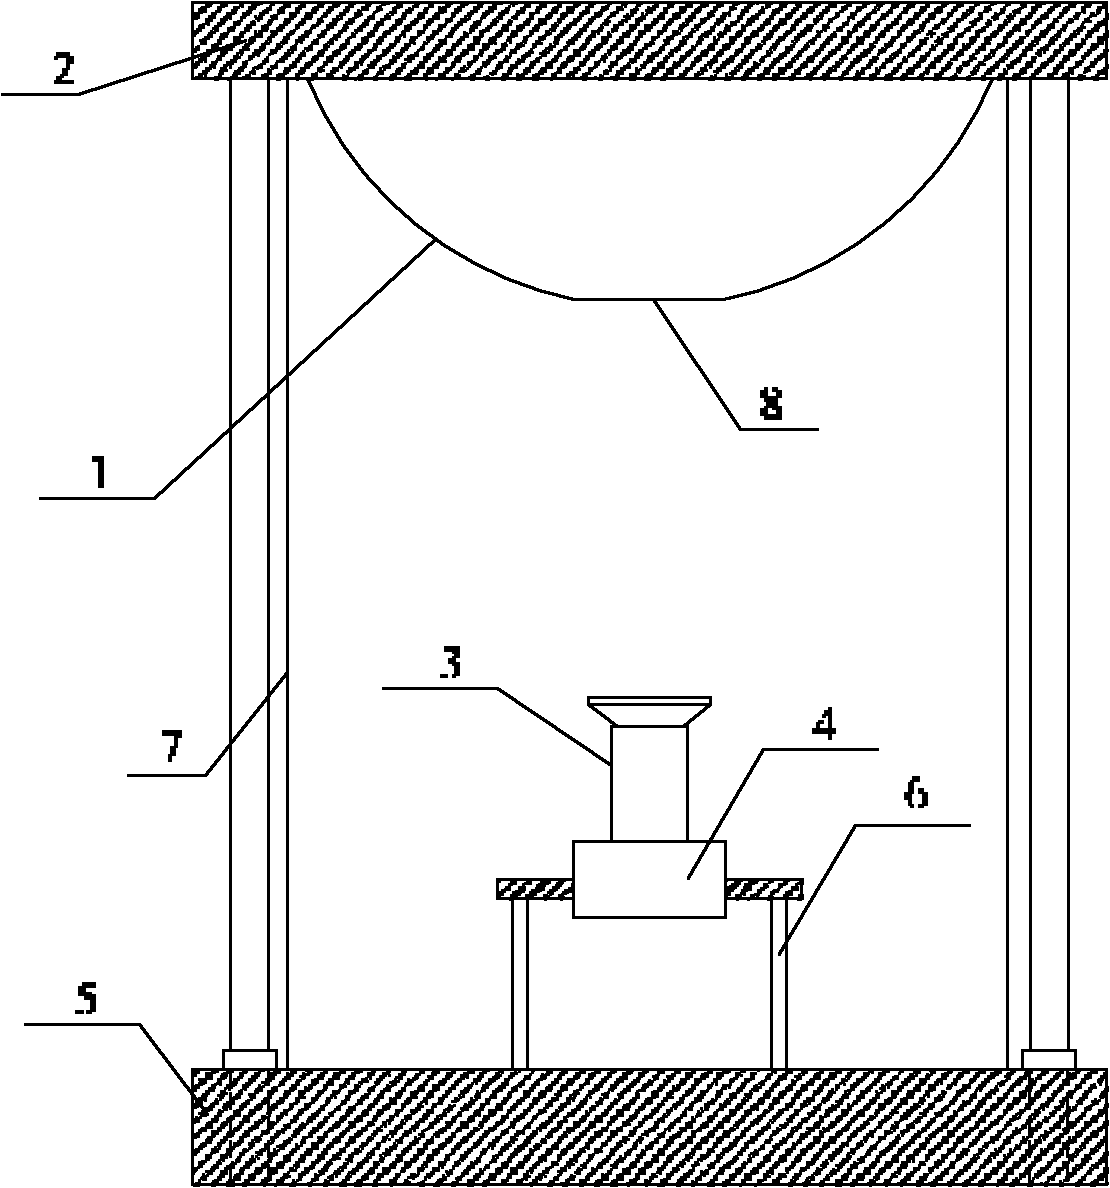 Apparatus for rapidly correcting installation position of panoramic vision measuring system